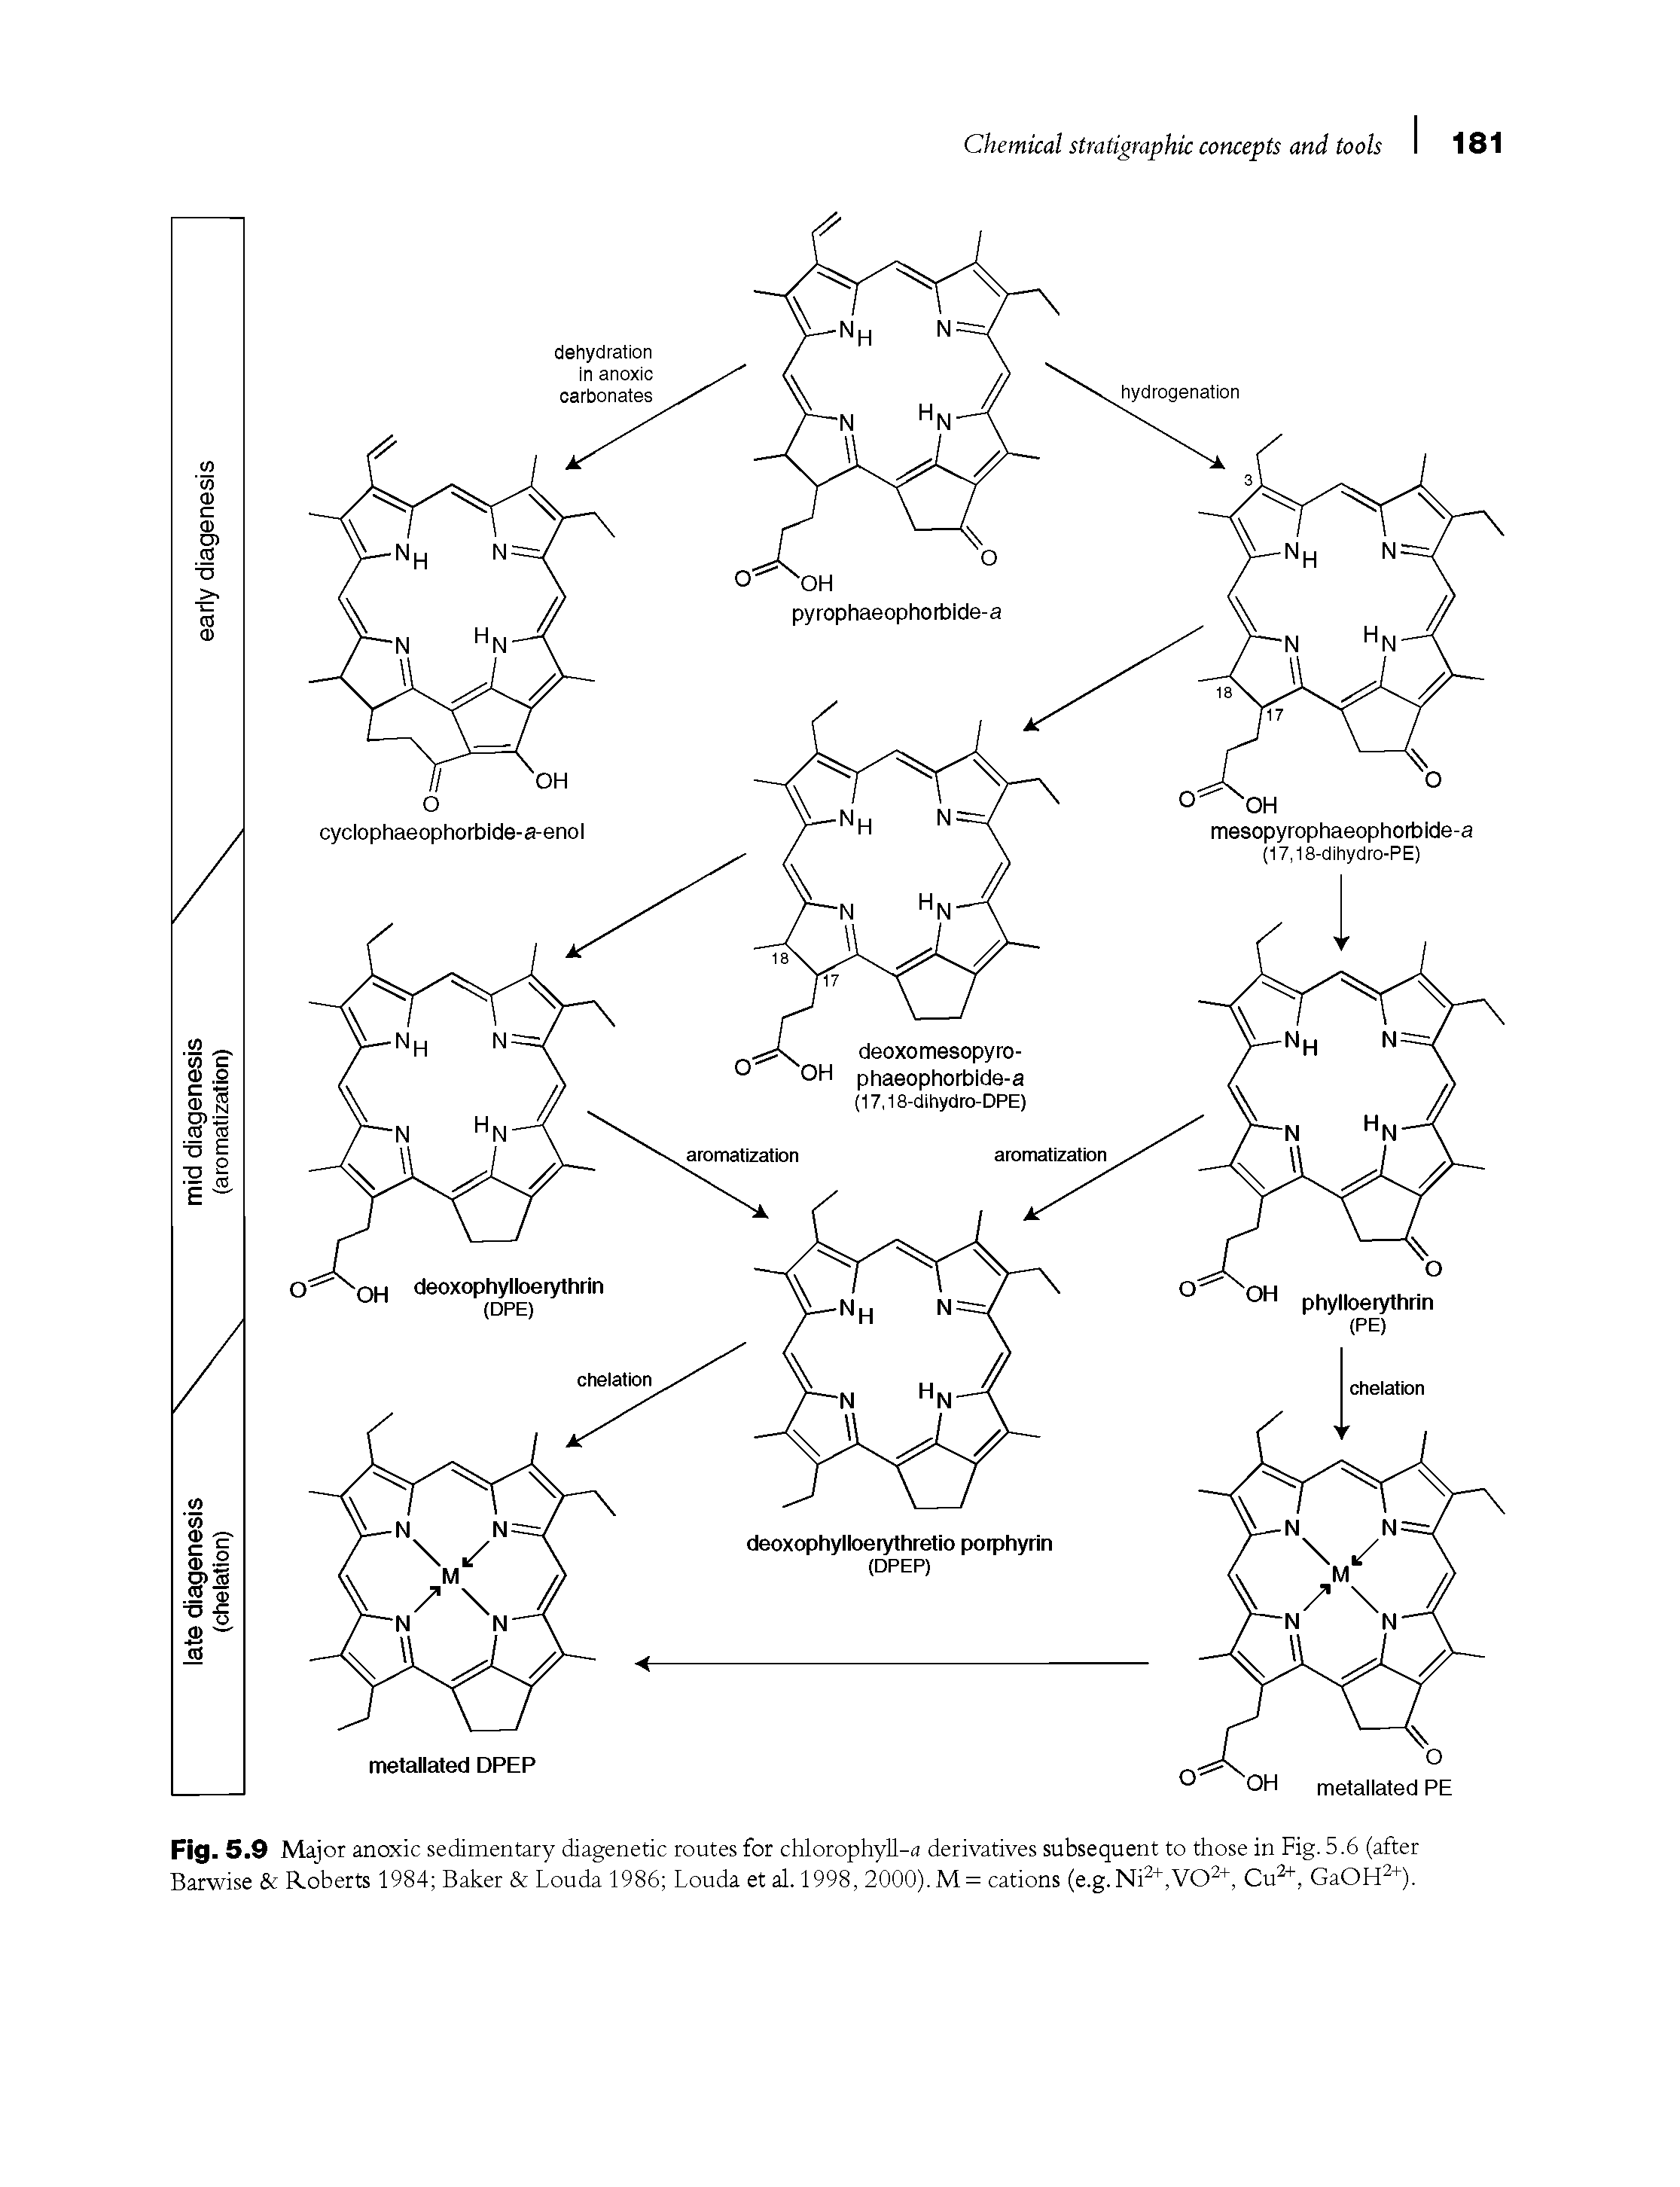 Fig. 5. 9 Major anoxic sedimentary diagenetic routes for chlorophyll-a derivatives subsequent to those in Fig. 5.6 (after Barwise Roberts 1984 Baker Louda 1986 Louda et al. 1998, 2000).M= cations (e.g.Ni2+,V02+, Cu2+, GaOH2+).